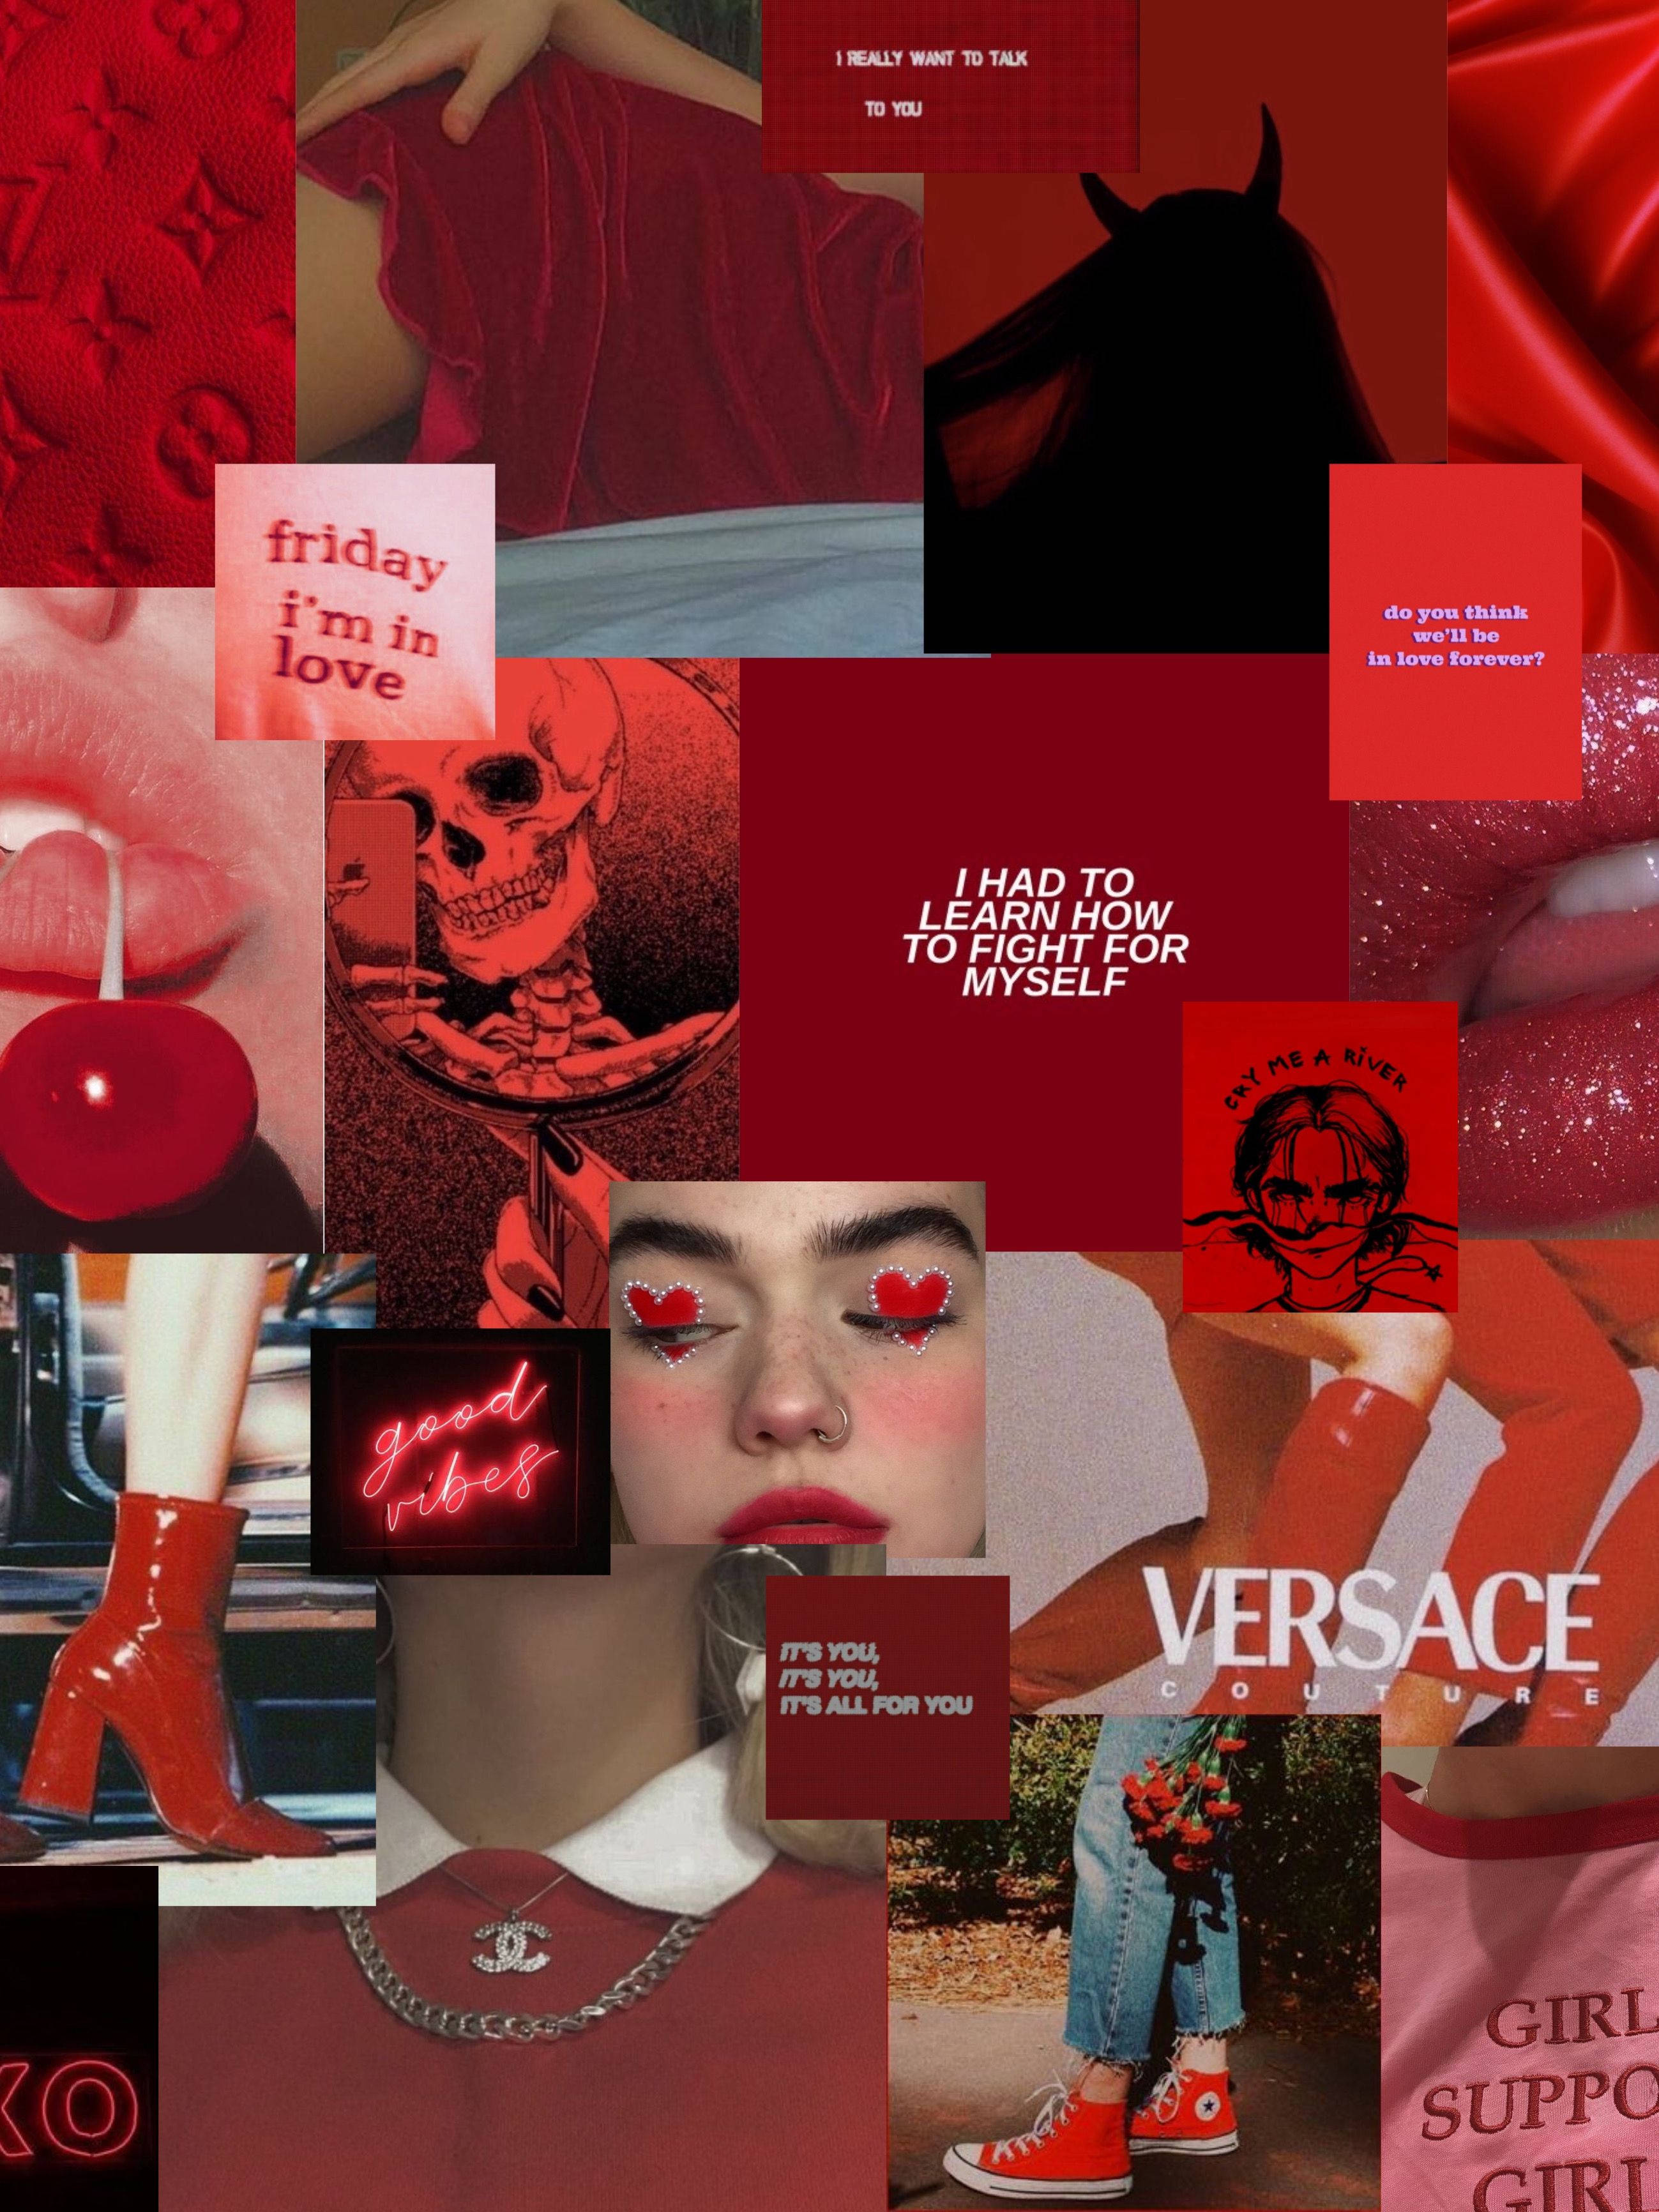 Aesthetic red collage background with quotes and images - Fashion, red